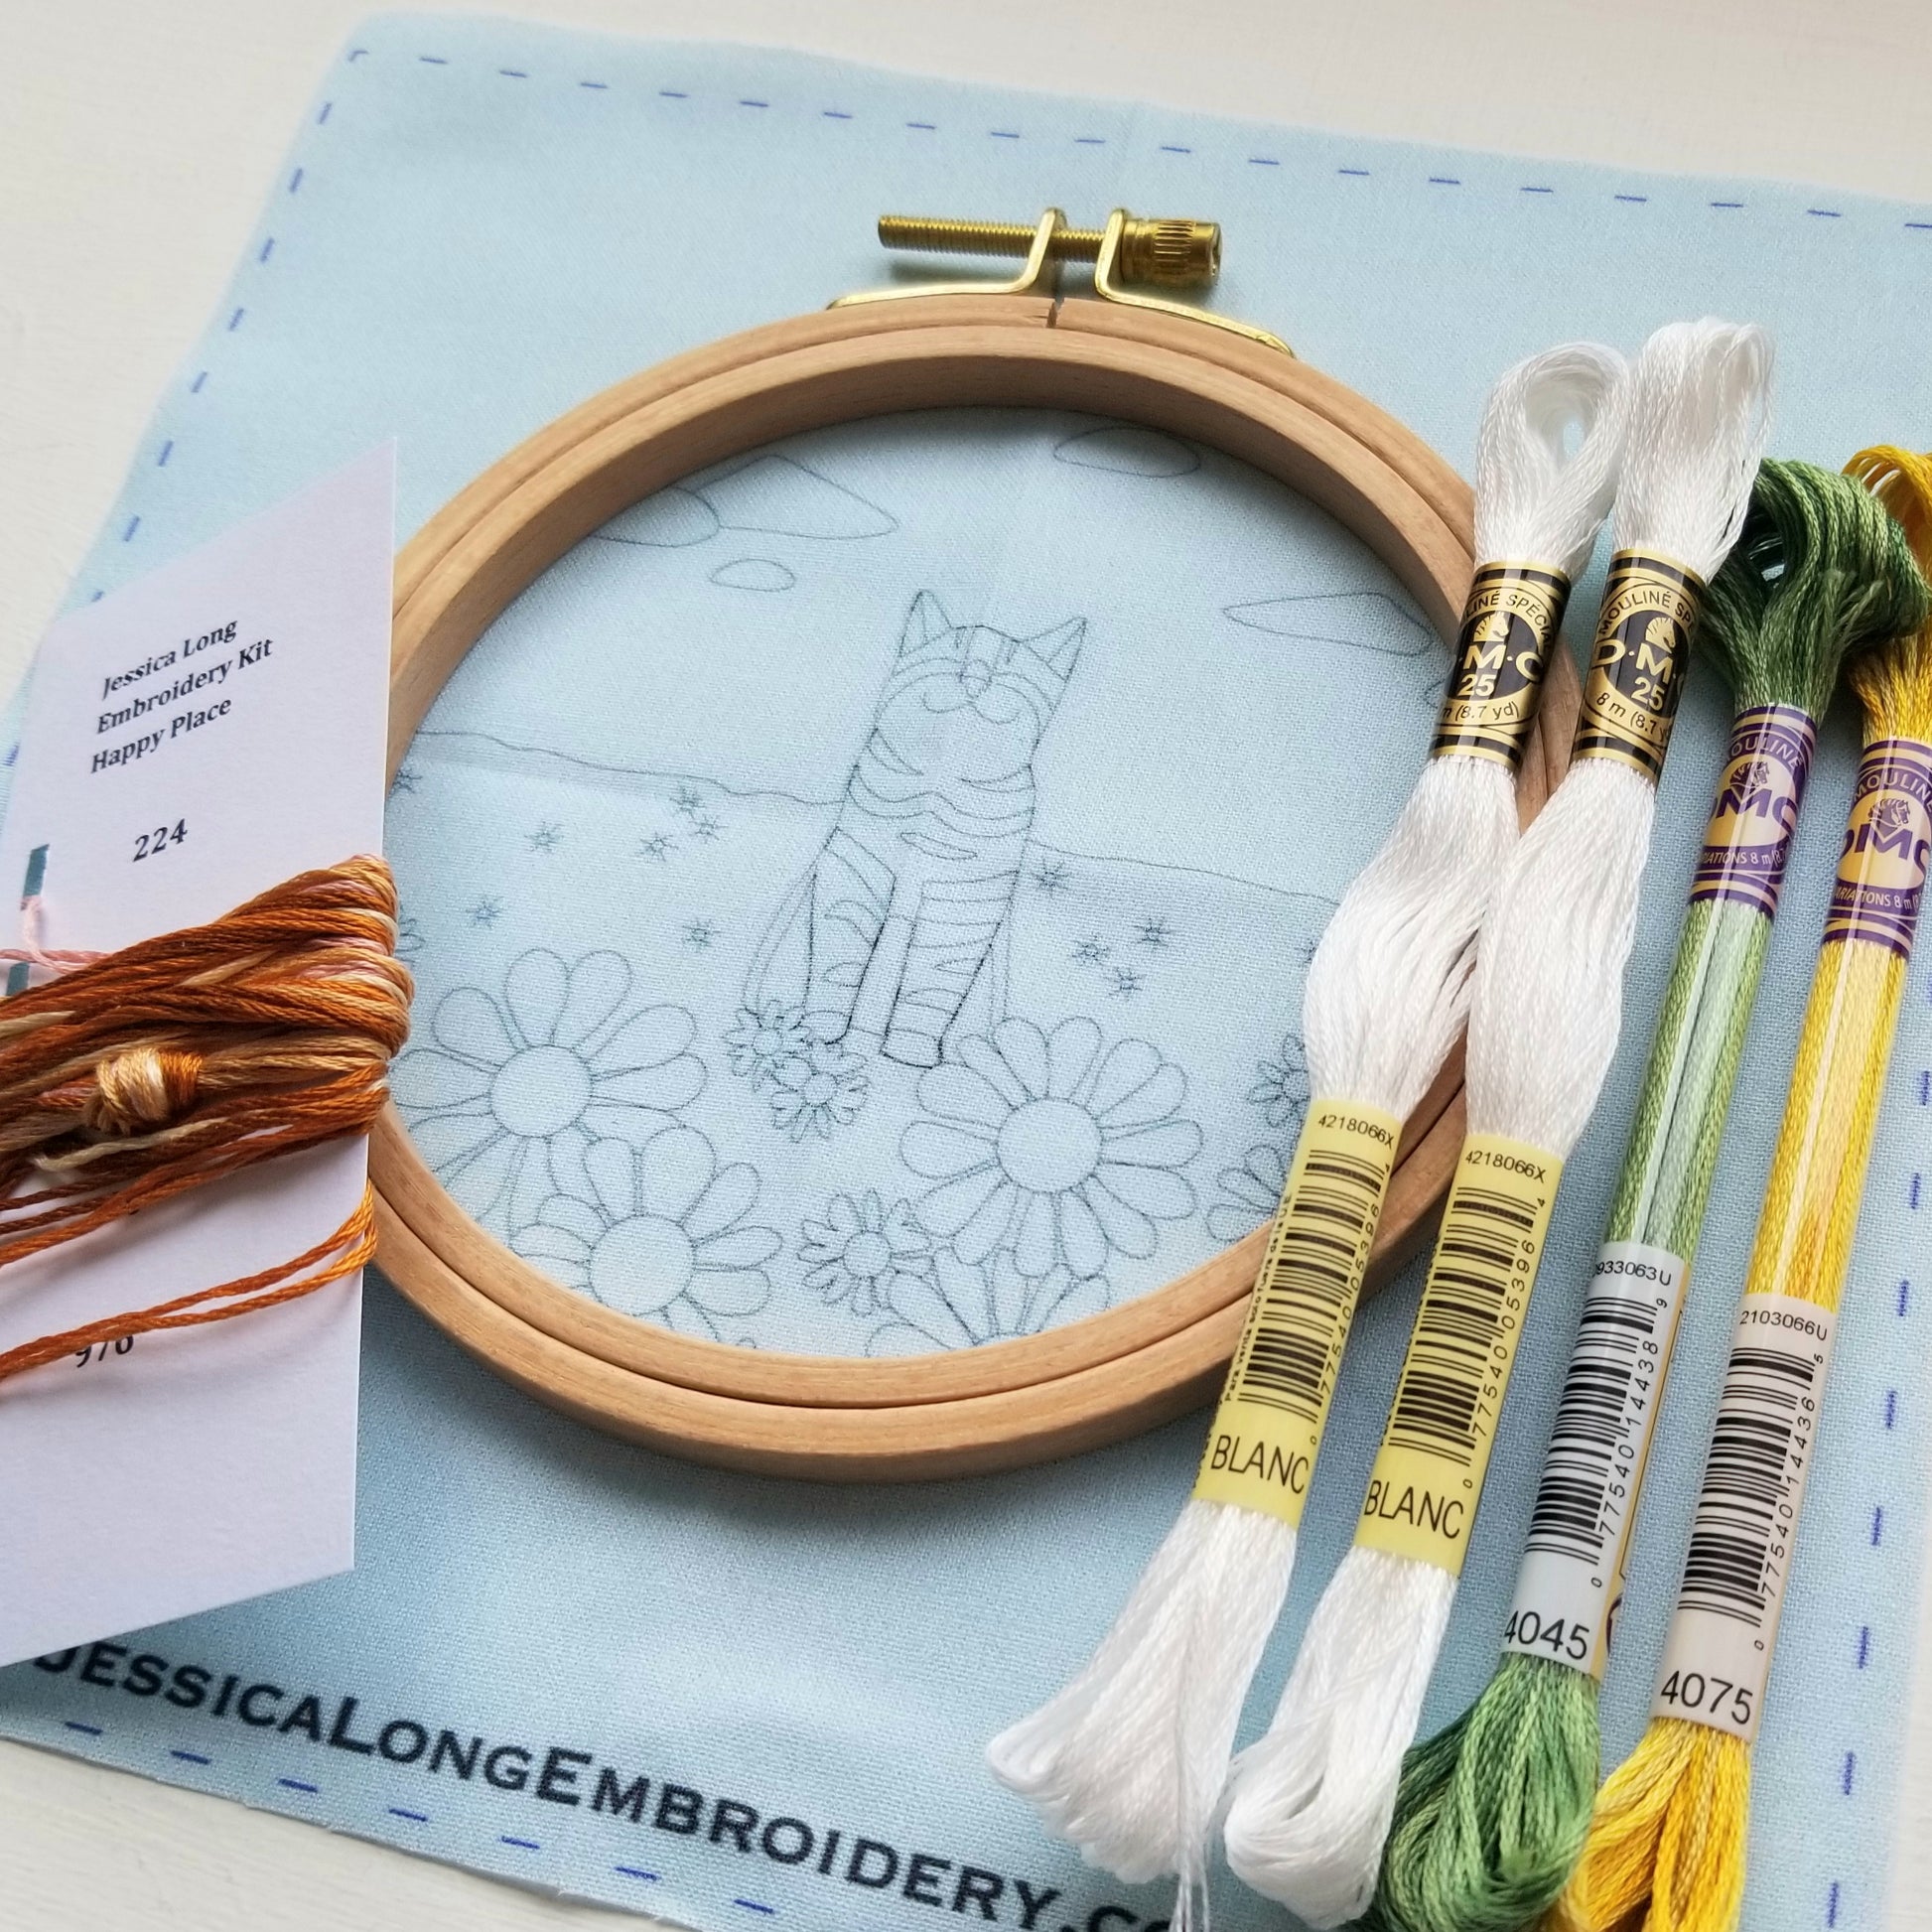 Catwalk Embroidery Kit – Jessica Long Embroidery